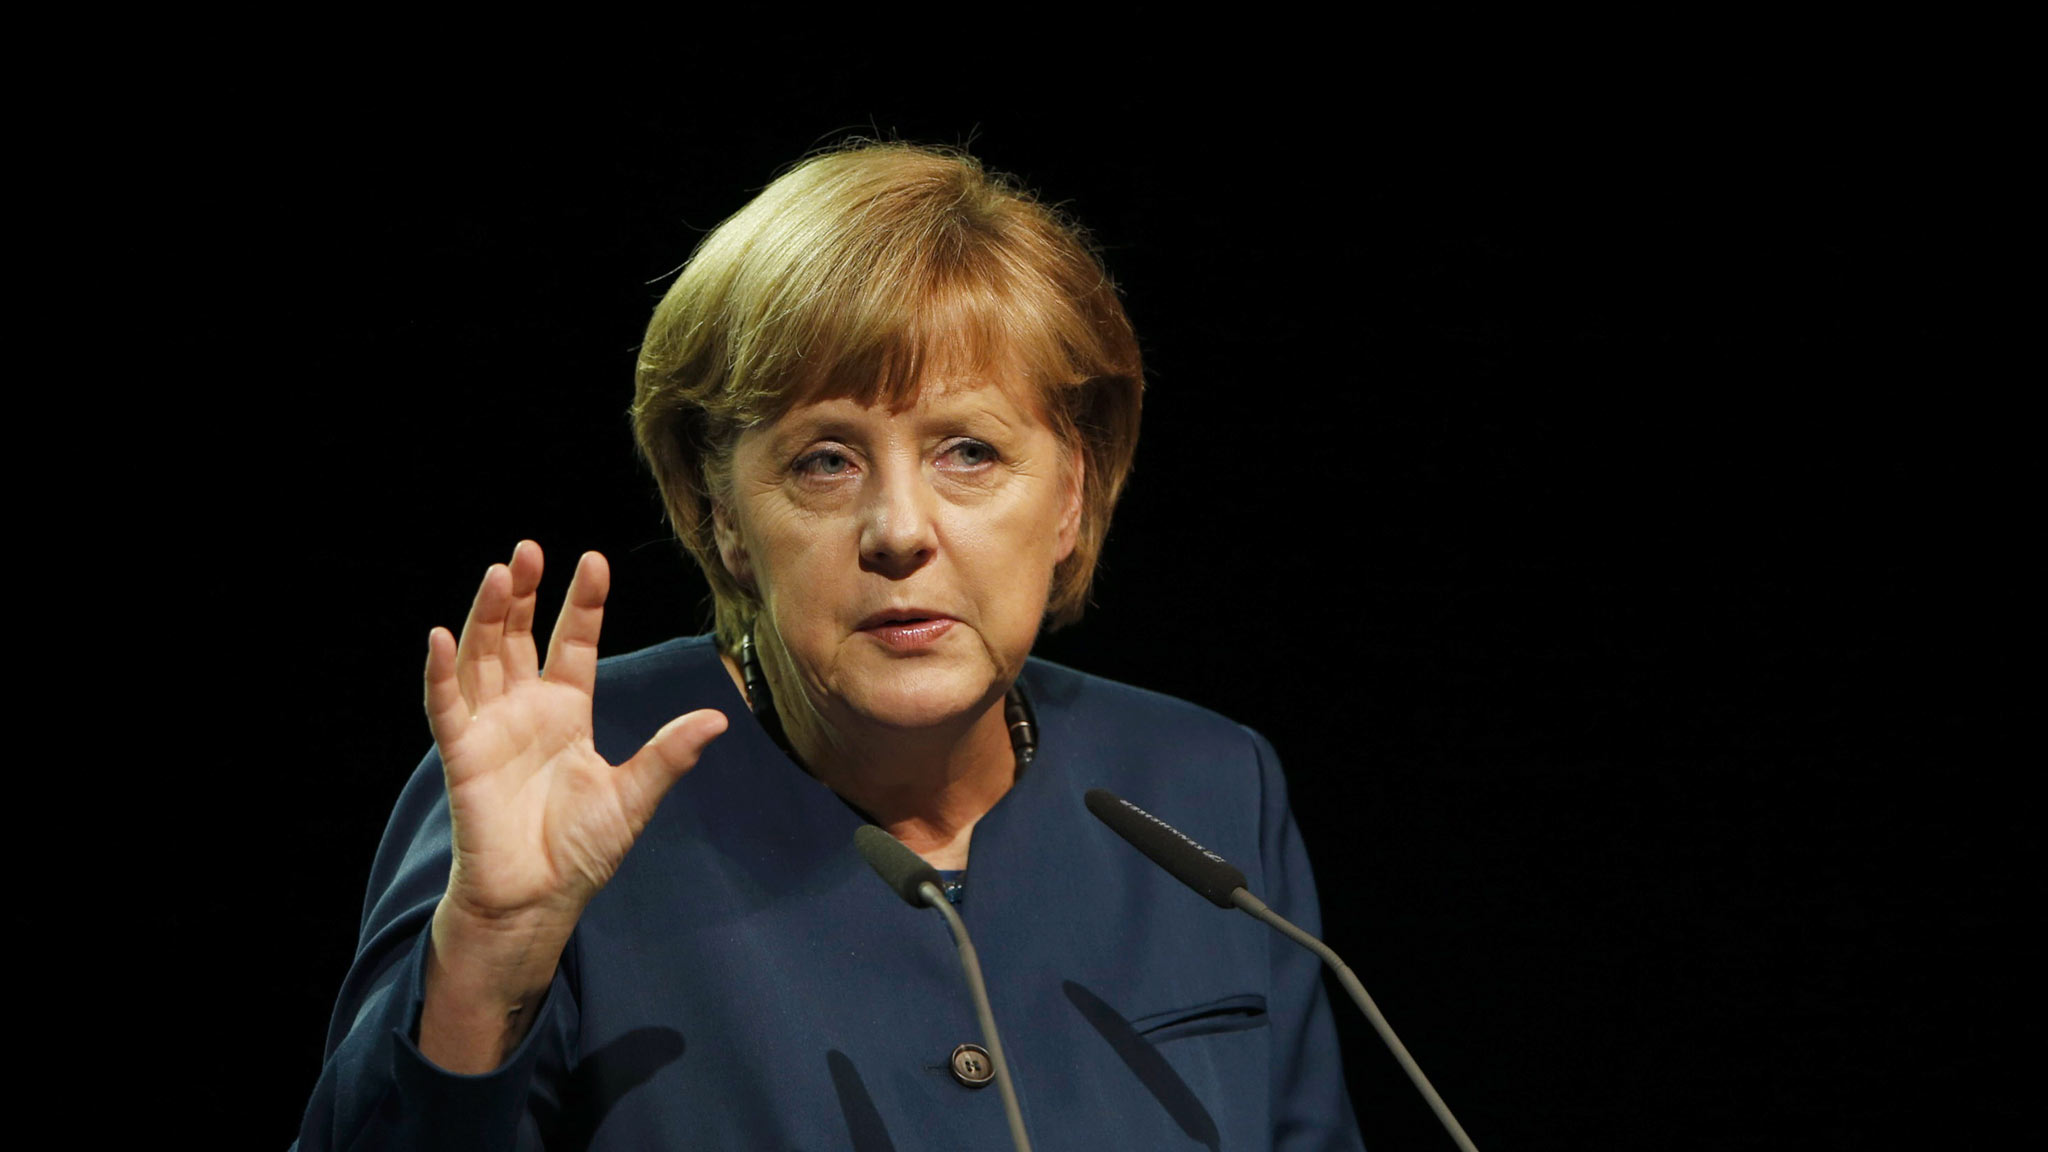 German Chancellor Angela Merkel gestures as she gives a speech at the German sustainable development congress in Berlin, May 13, 2013. REUTERS/Fabrizio Bensch (GERMANY - Tags: POLITICS ENVIRONMENT HEADSHOT)